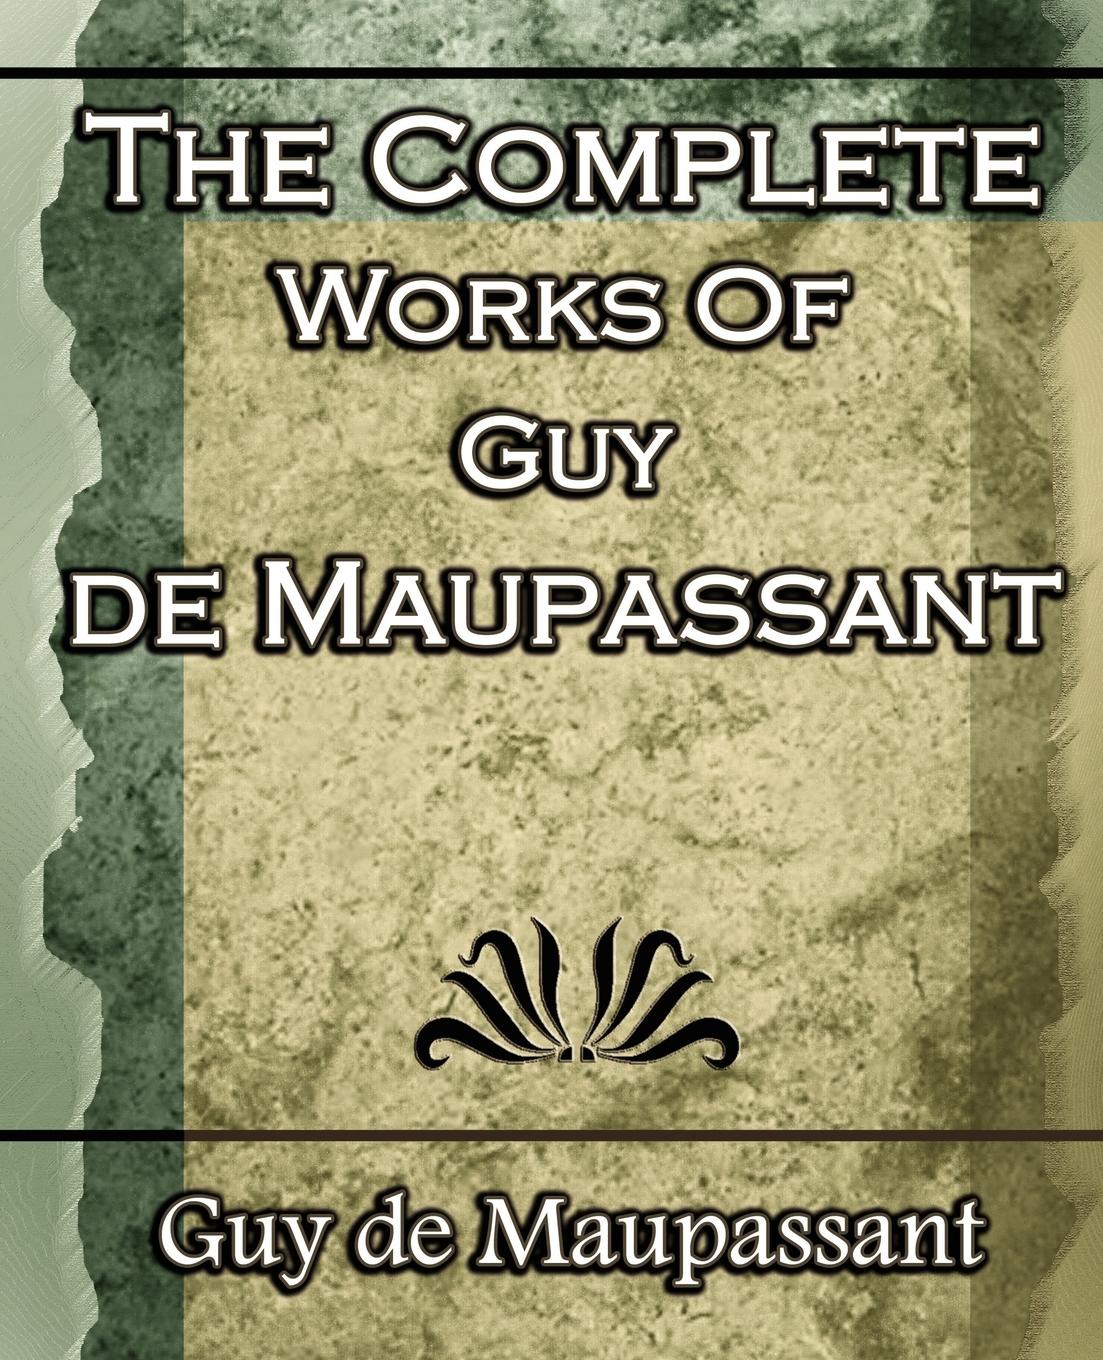 The Complete Works of Guy de Maupassant. Short Stories- 1917